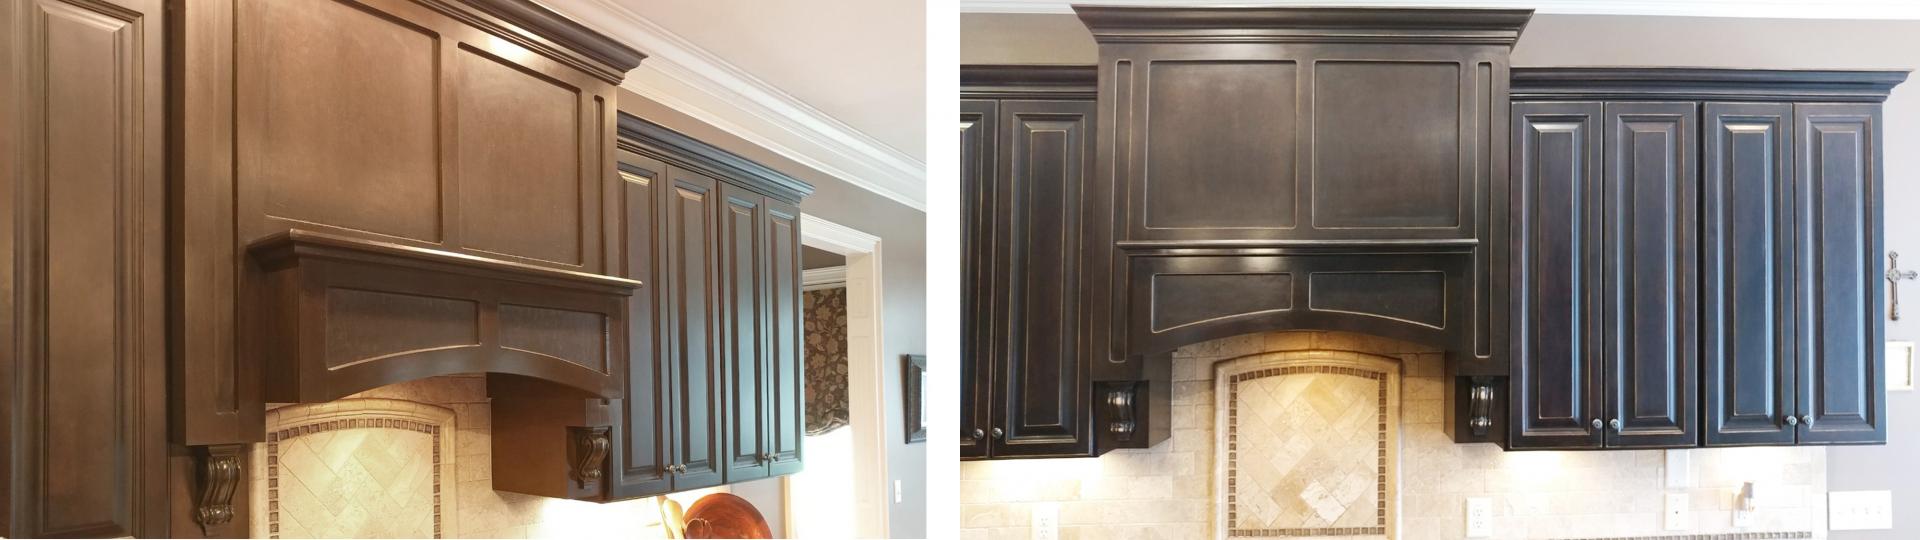 before and after rustic kitchen cabinet make-over.